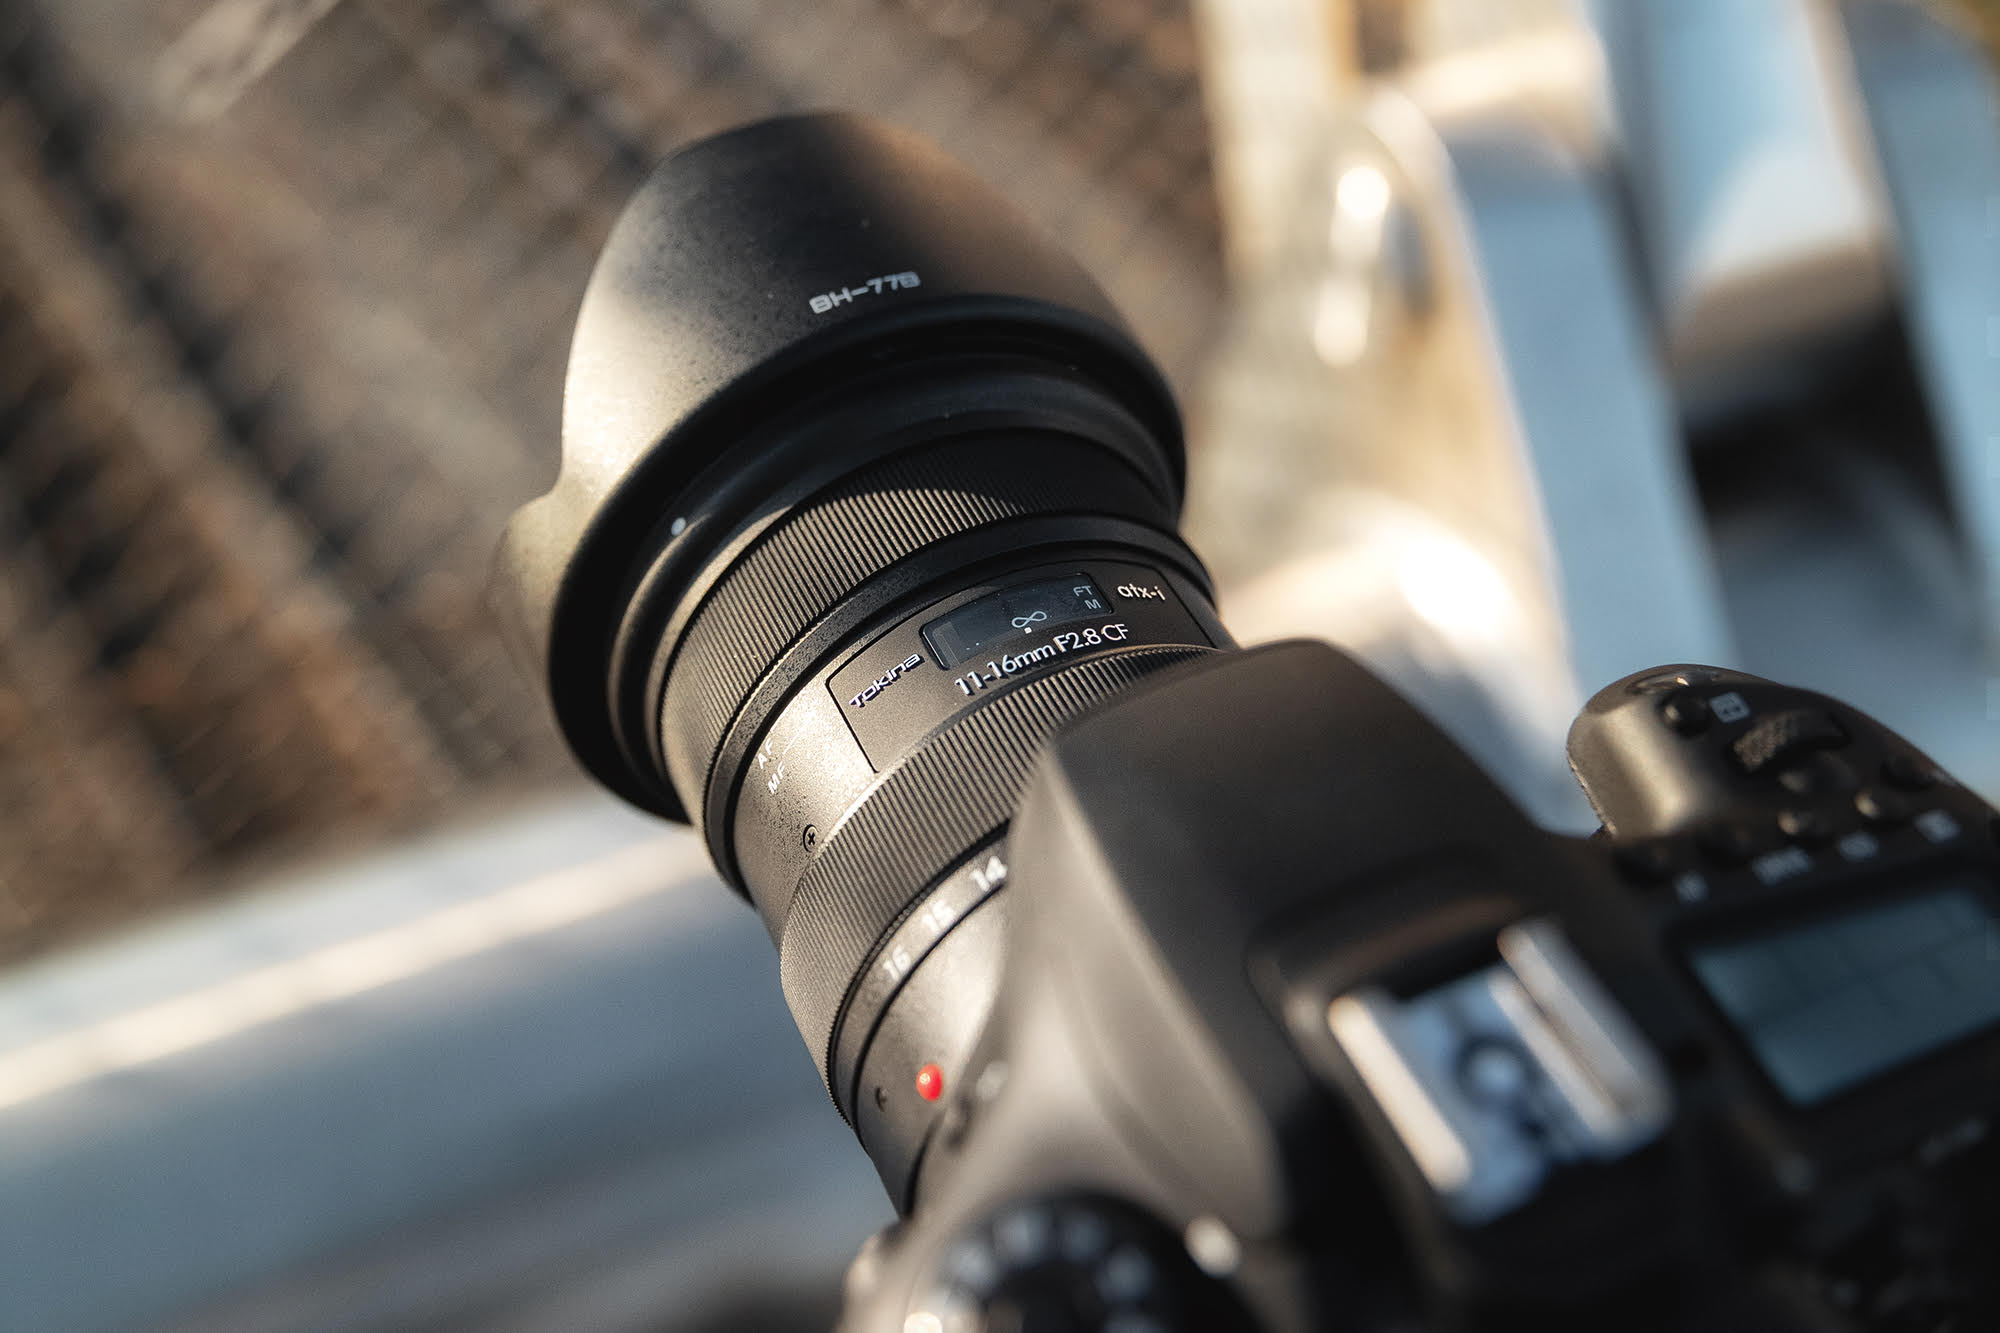 The New Tokina atx-i 100mm F2.8 Macro Lens Costs Only $429